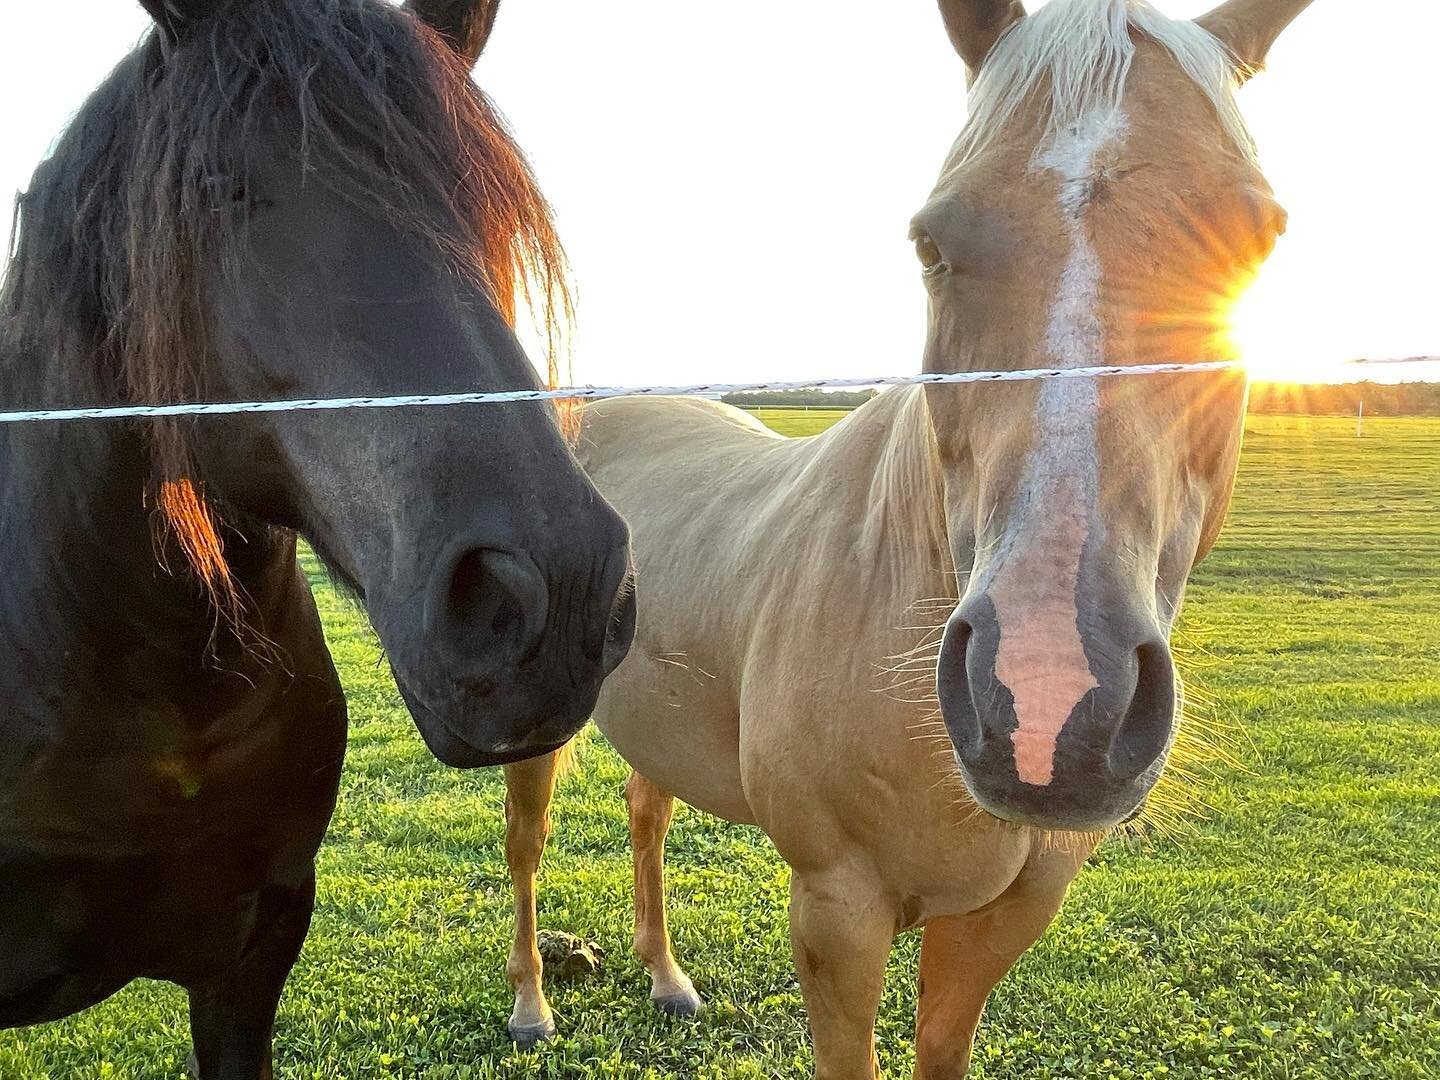 Meet the beautiful and friendly horses of Aspire Ranch where we lucked into being the very first Harvest Host guests to enjoy these beautiful surrounds. 
@harvesthosts #aspireranch #schoolhouseunique #adventuresinbliss #vanlife #harvesthosts #horsefa